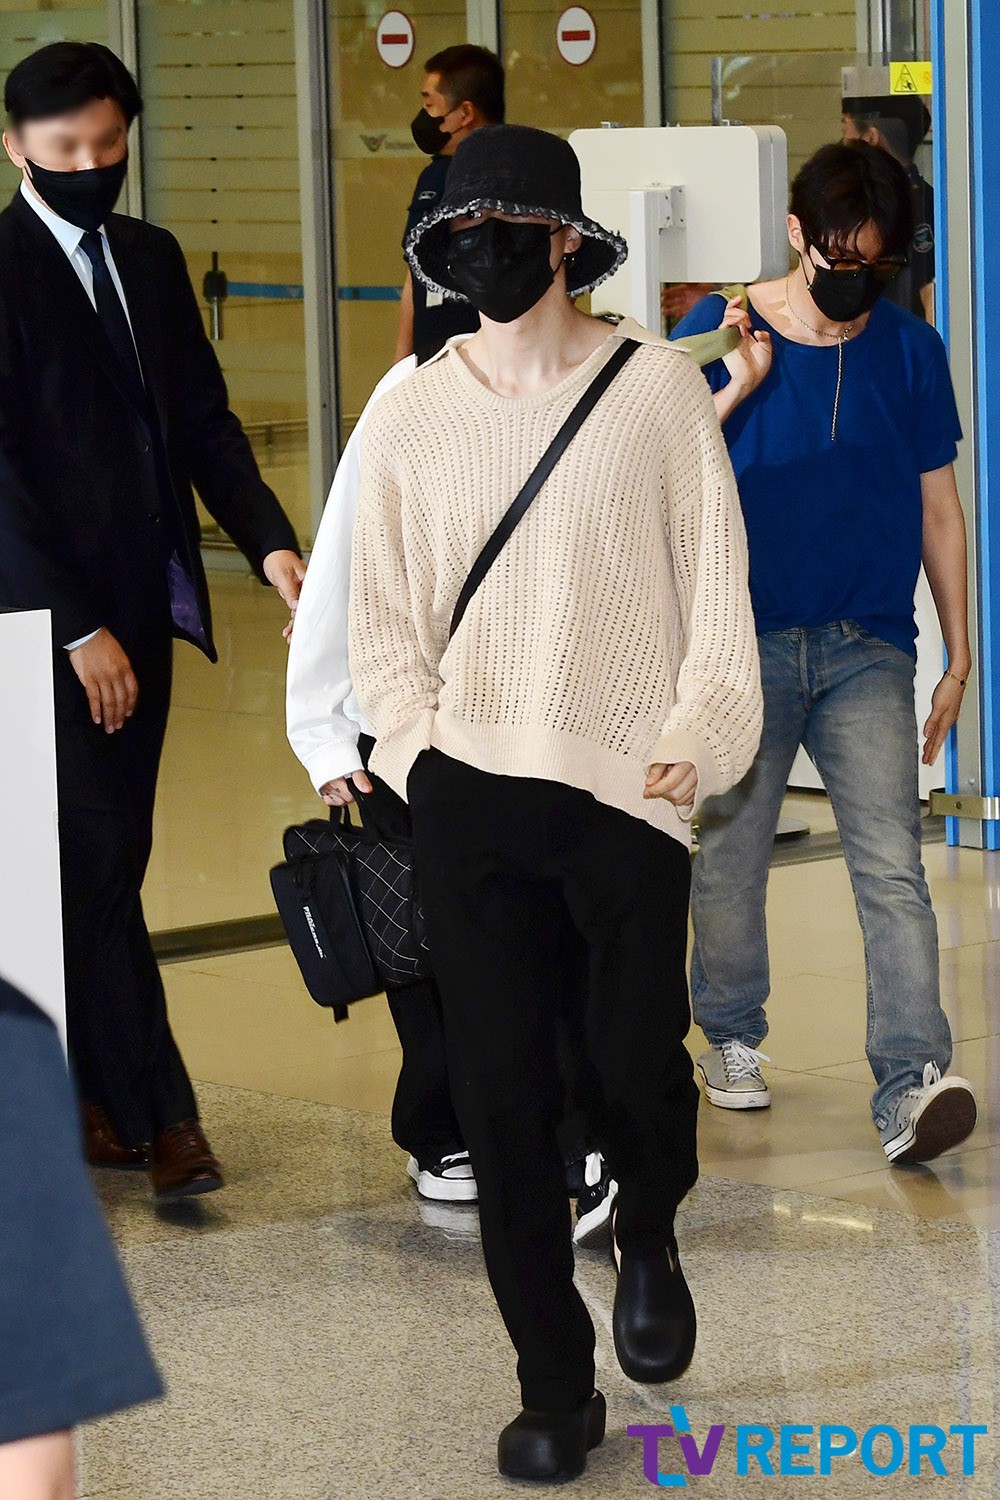 Clout News on X: Park Jimin photographed at the Incheon International  Airport today 📸❤️ #parkjimin #jimin #bts #bts_proof   / X